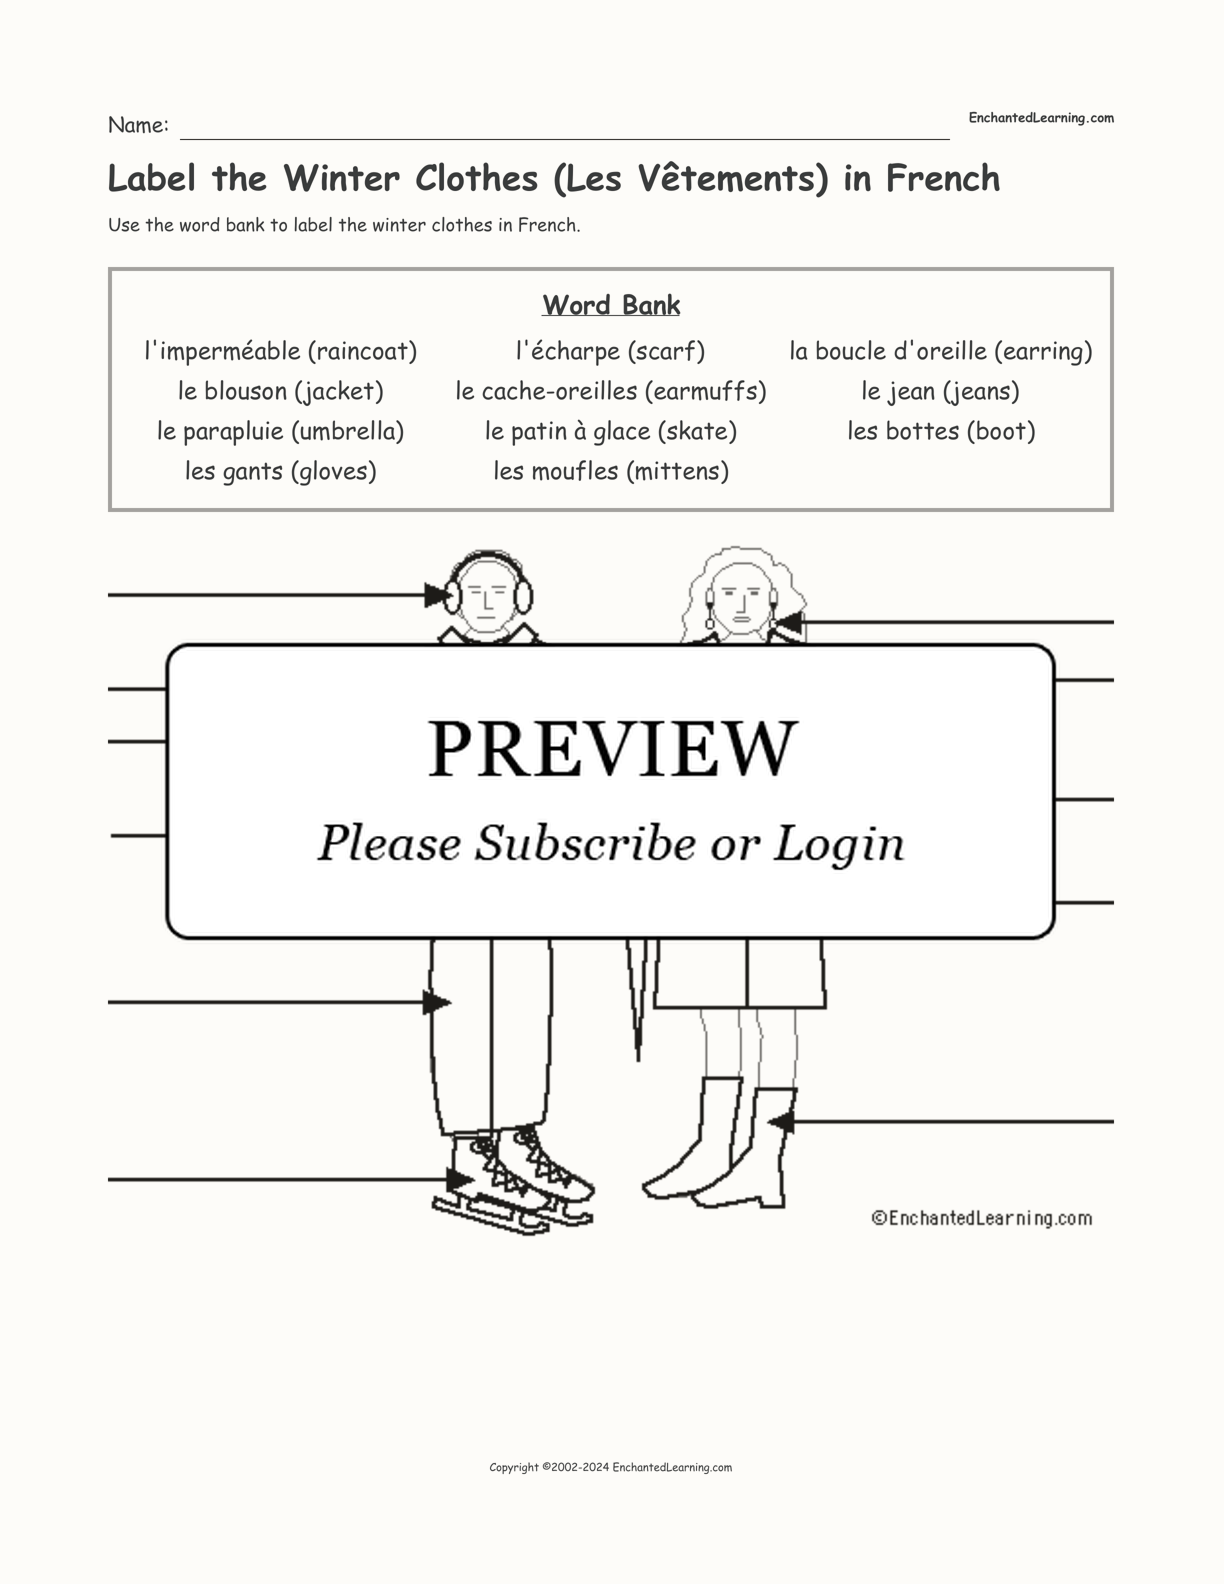 Label the Winter Clothes (Les Vêtements) in French interactive worksheet page 1